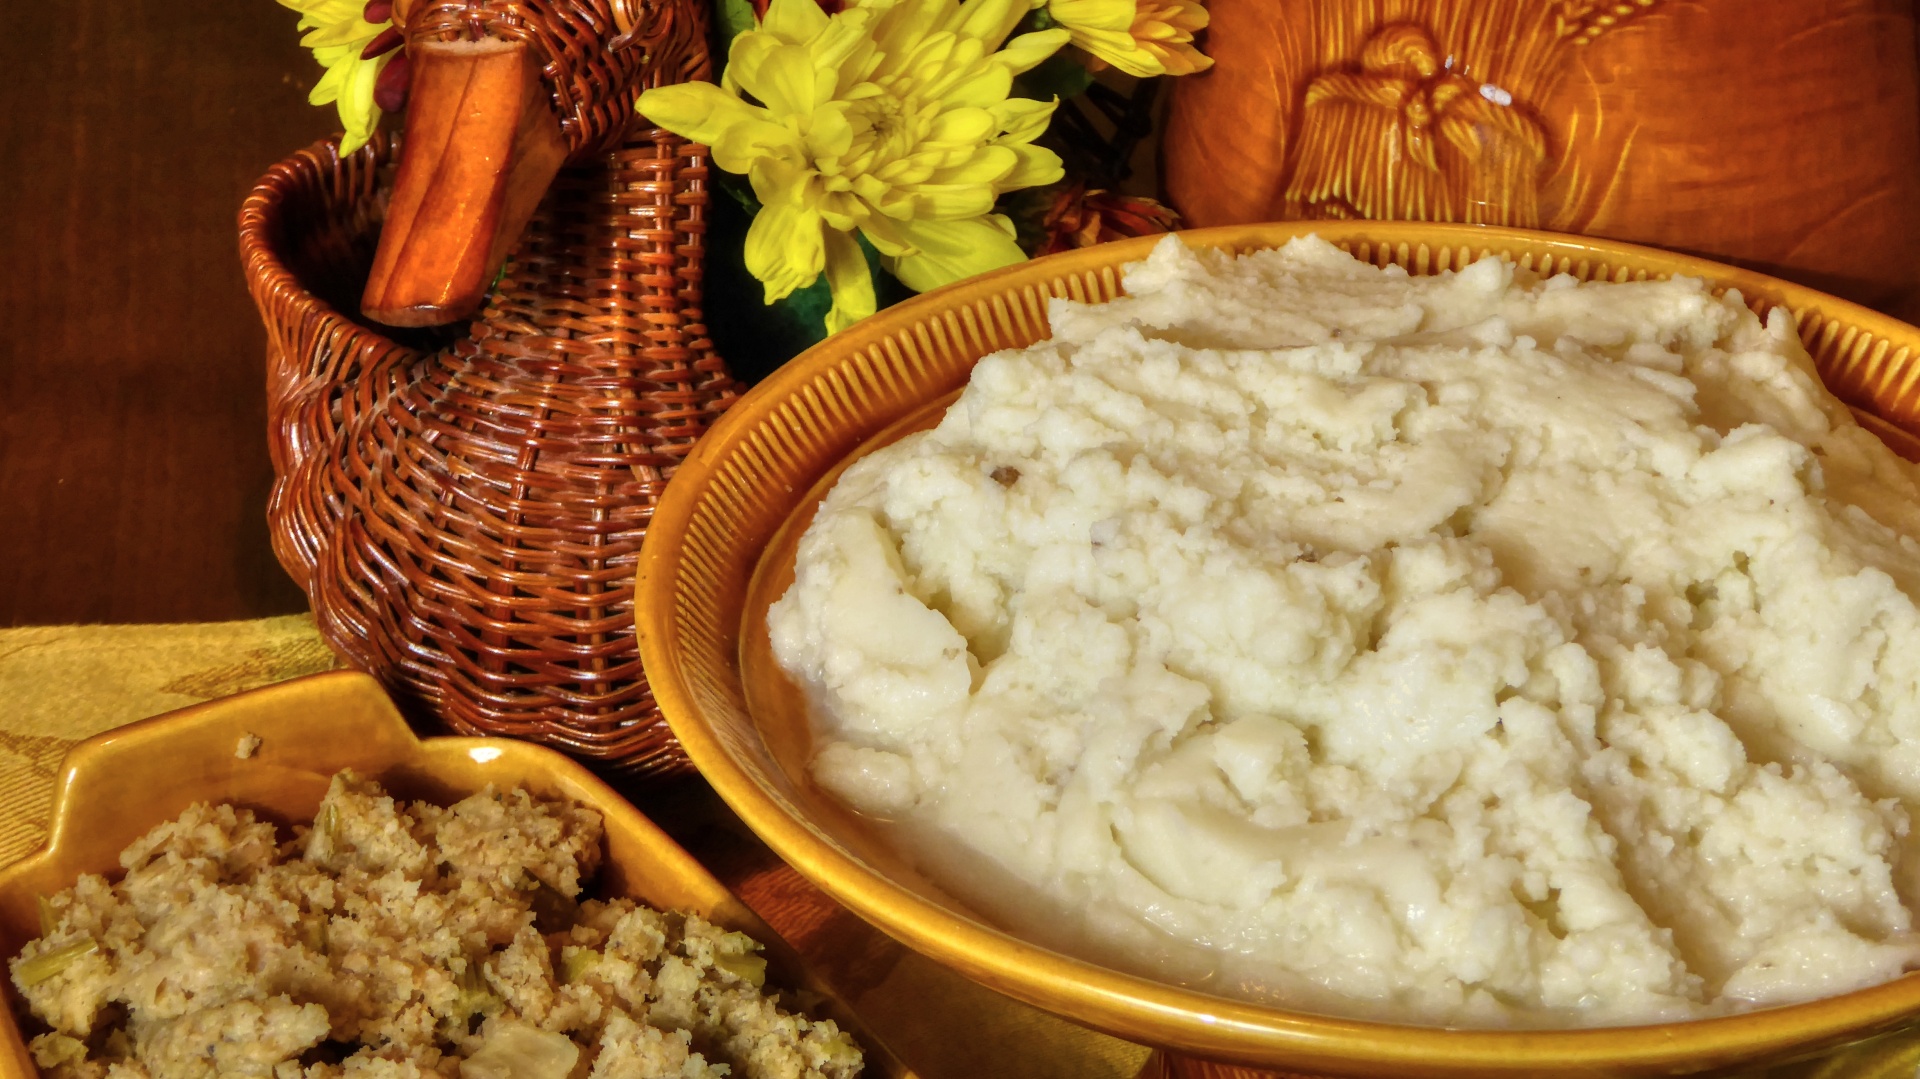 Mashed Potatoes With Celery Root